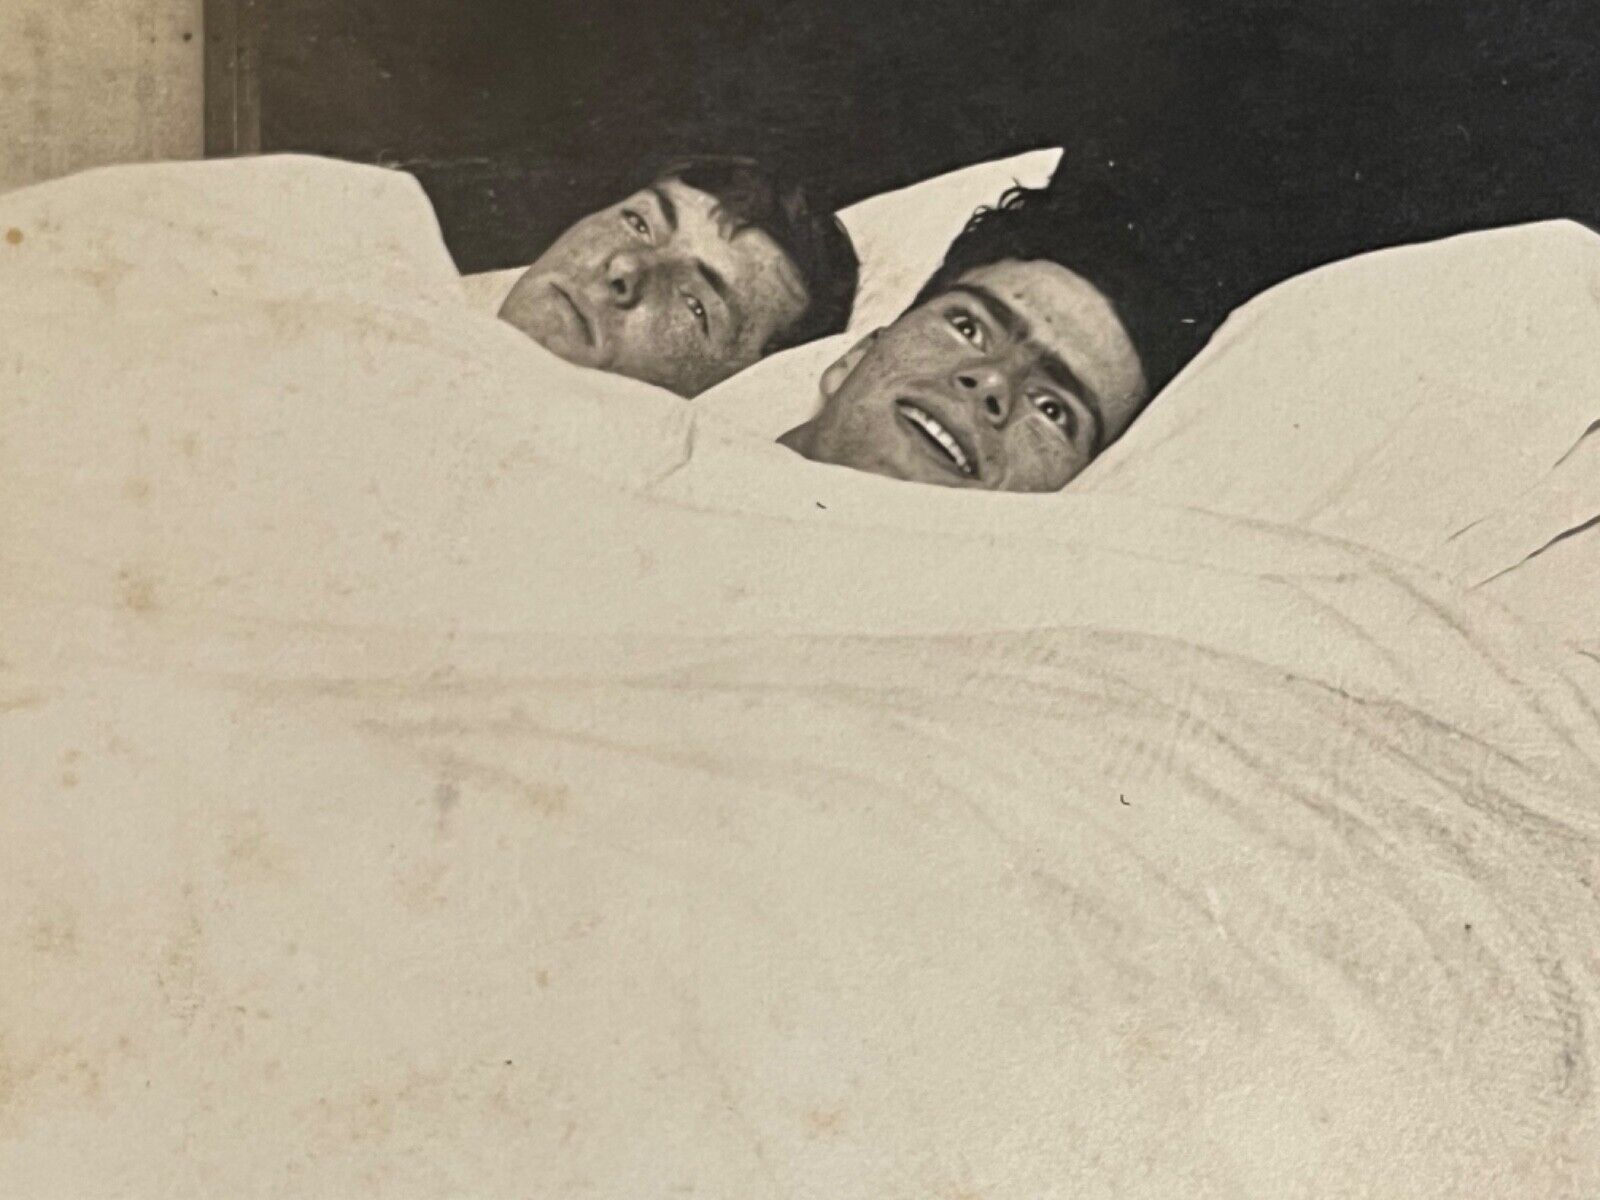 Purdue Men in Bed Carl Mitchell Frank Strole Indiana Real Photo Postcard c1910